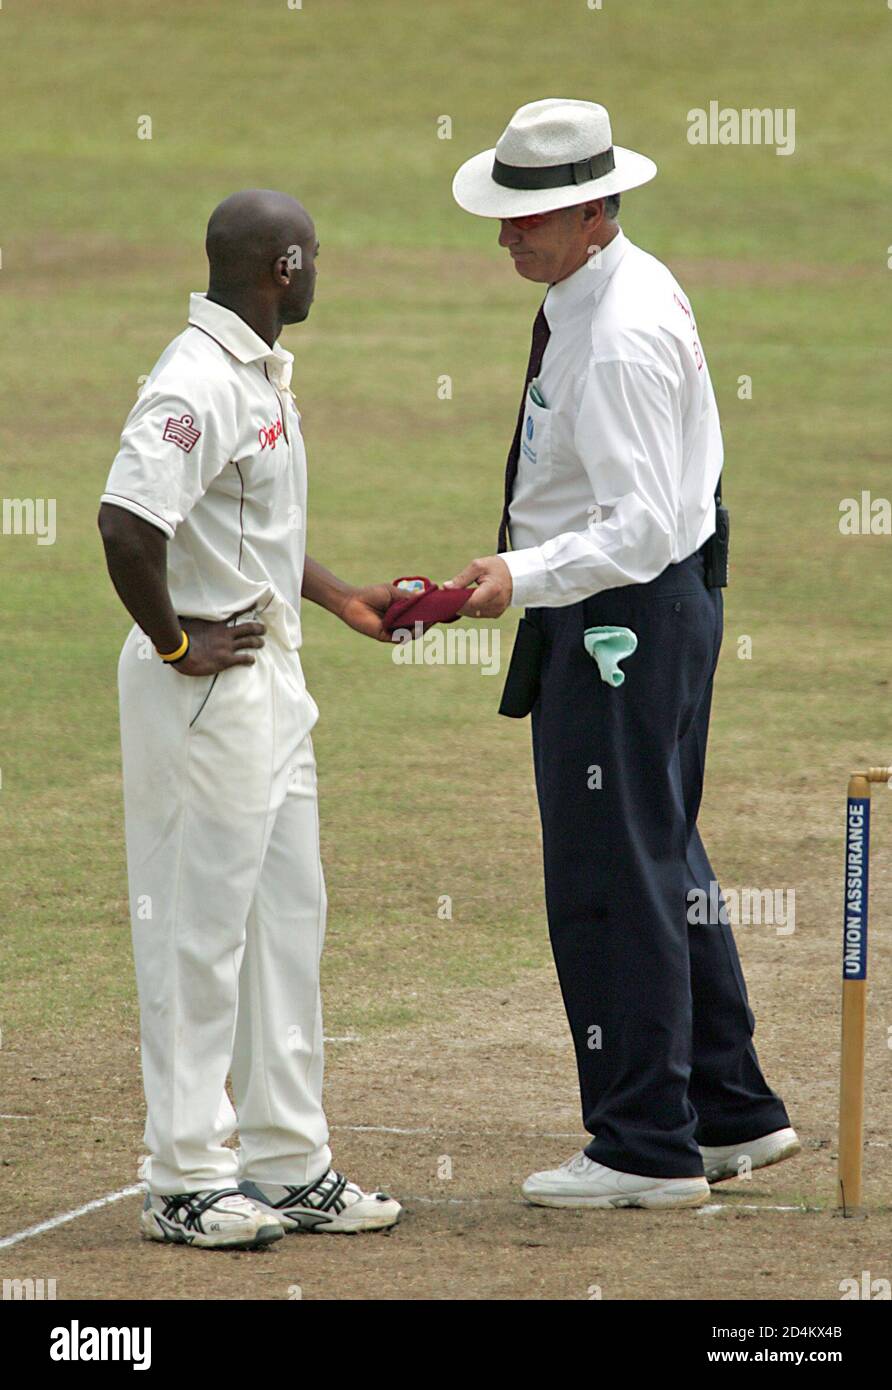 New Zealand umpire Hill hands West Indian fast bowler Best his cap after removing him from bowling during the fourth day of the second test cricket match against Sri Lanka in Kandy.  New Zealand umpire Tony Hill (R) hands West Indian fast bowler Tino Best his cap after removing him from bowling in rest of the match after the bowler bowled a second beamer against Sri Lankan batsman Rangana Herath (not in picture) during their fourth day of the second test cricket match at Asgiriya cricket stadium in Kandy, Sri Lanka July 25, 2005. REUTERS/Anuruddha Lokuhapuarachchi Stock Photo